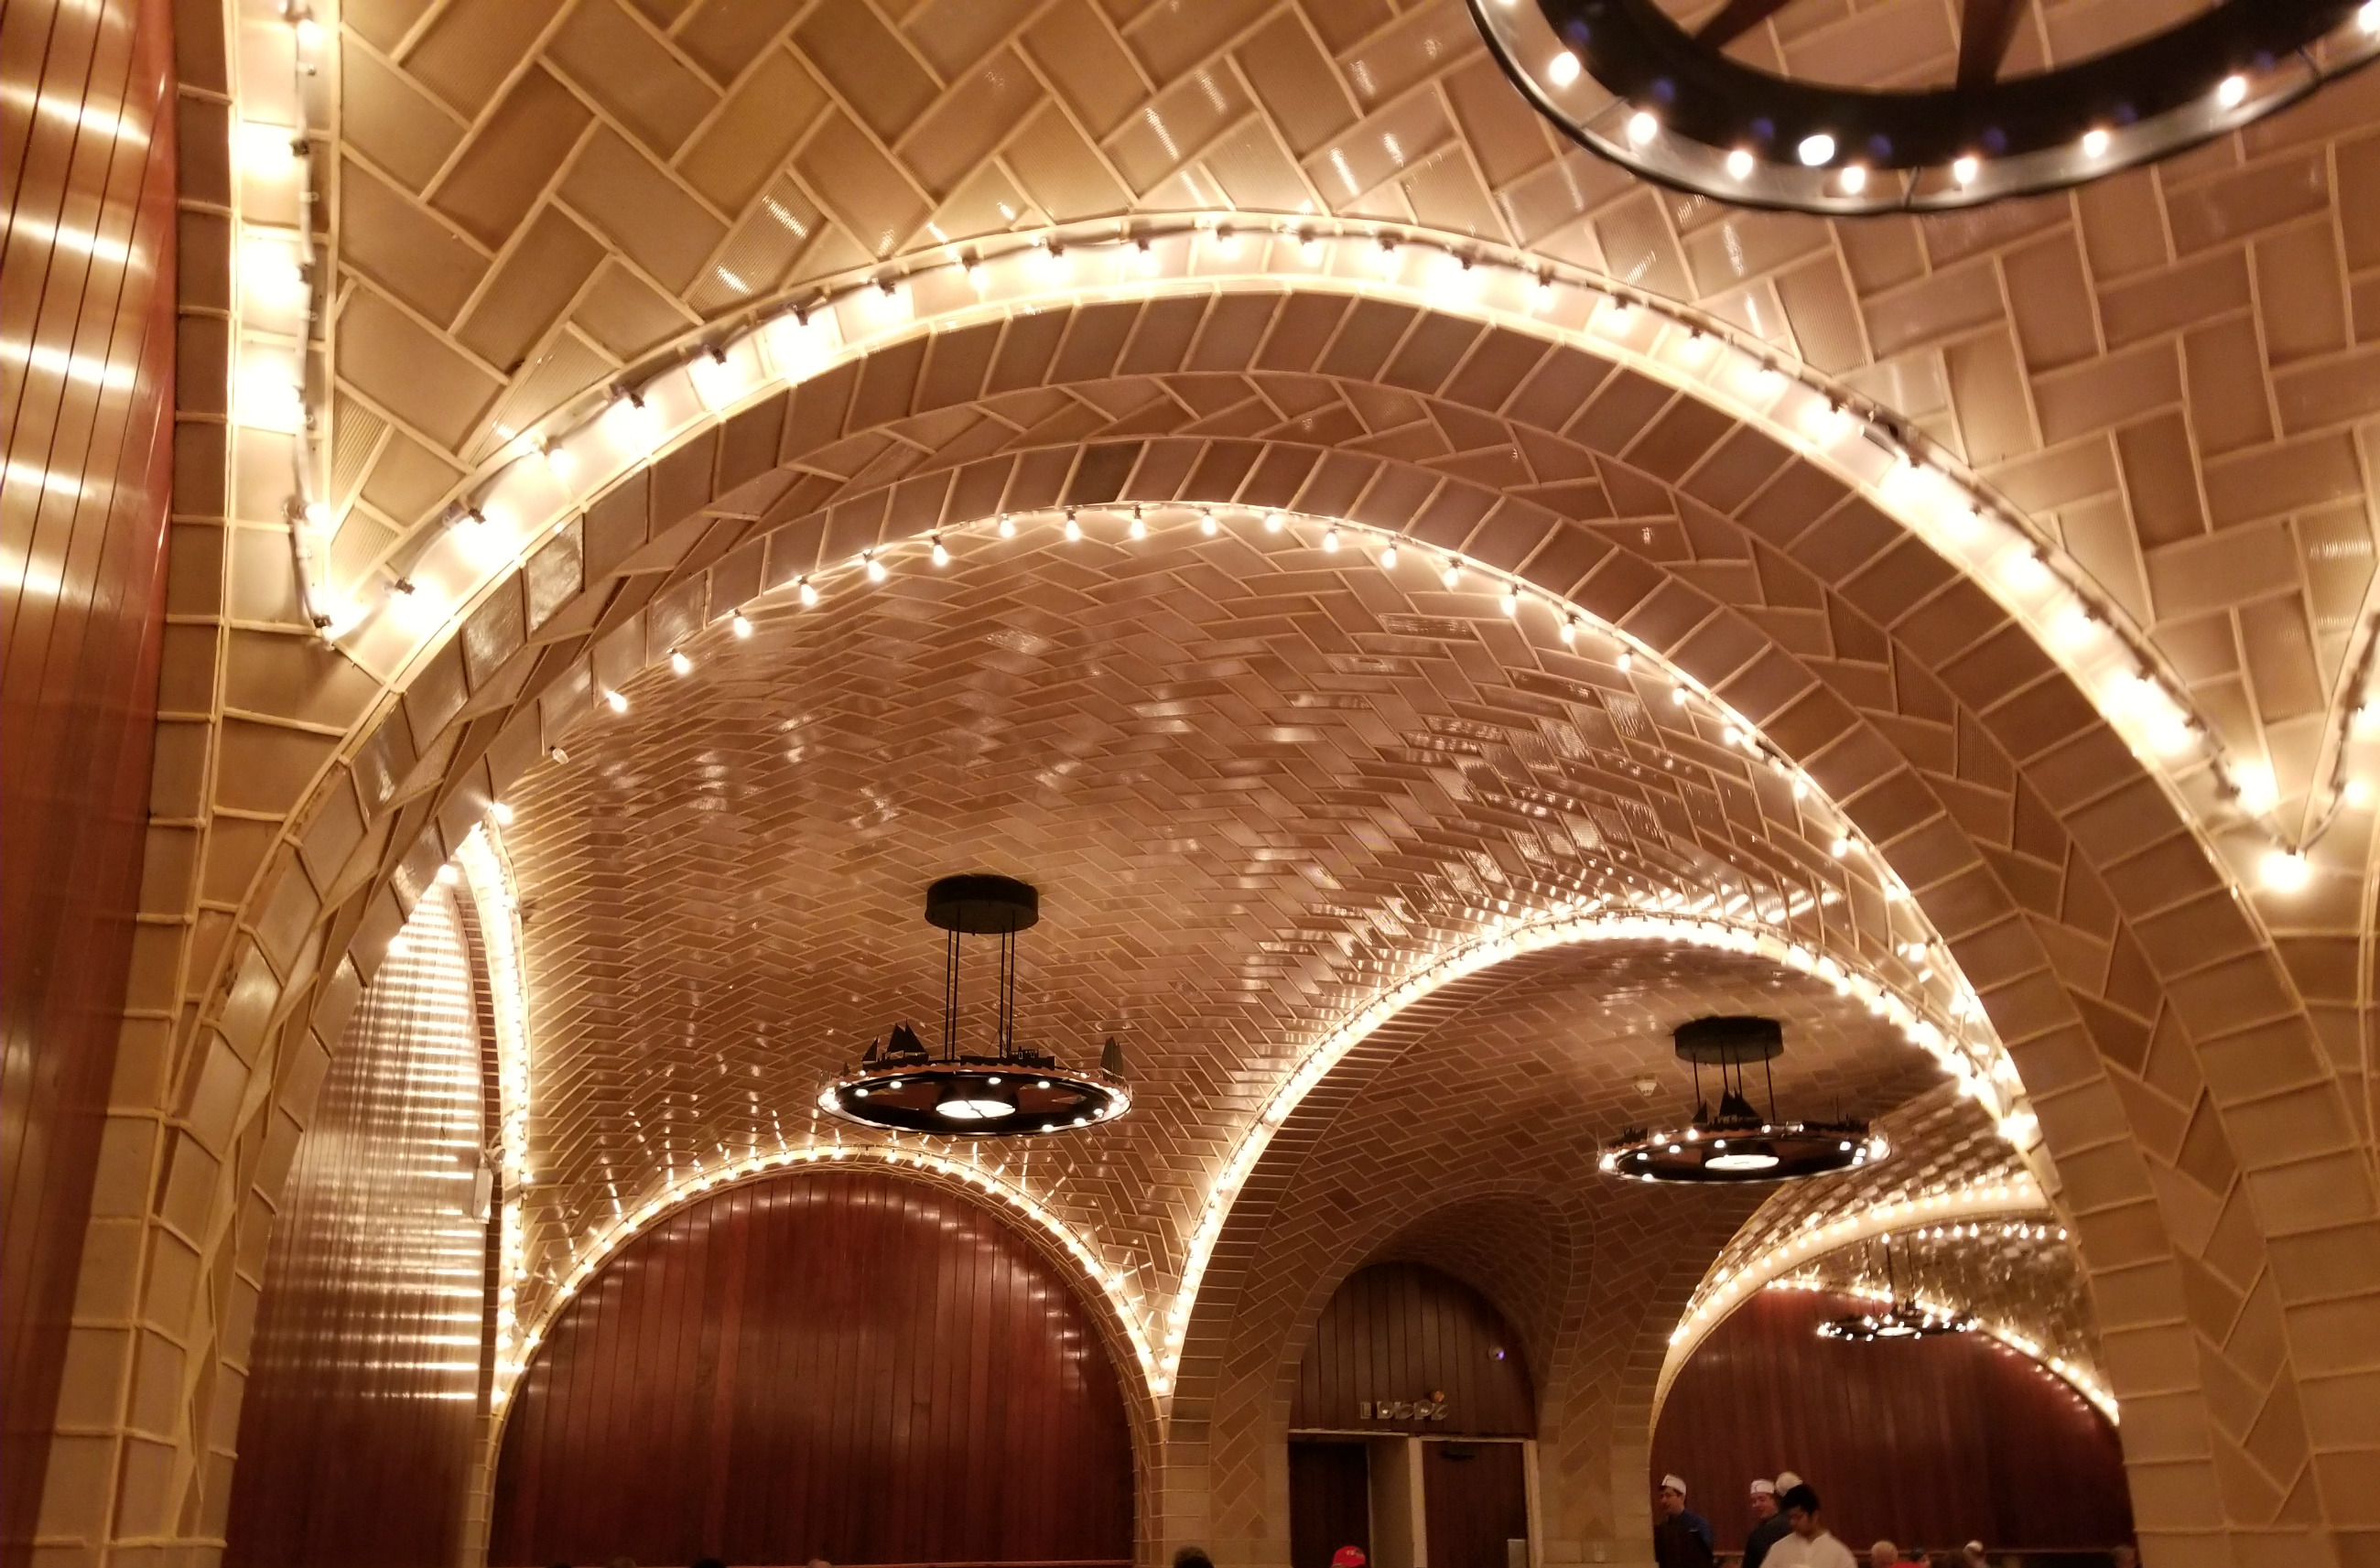 Oyster Bar, Grand Central, NYC - 6.21.2018